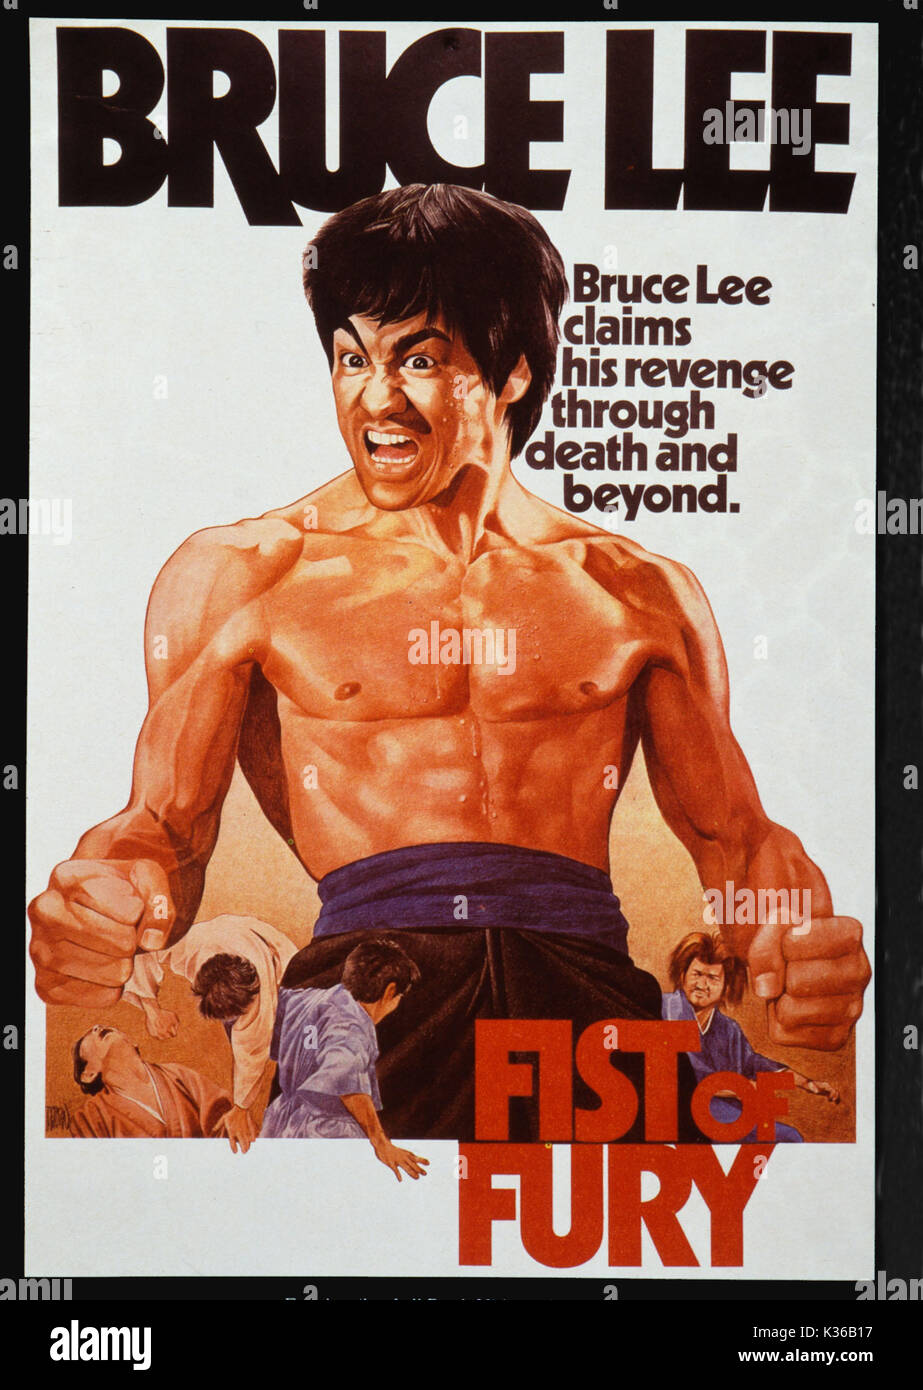 fists of bruce lee